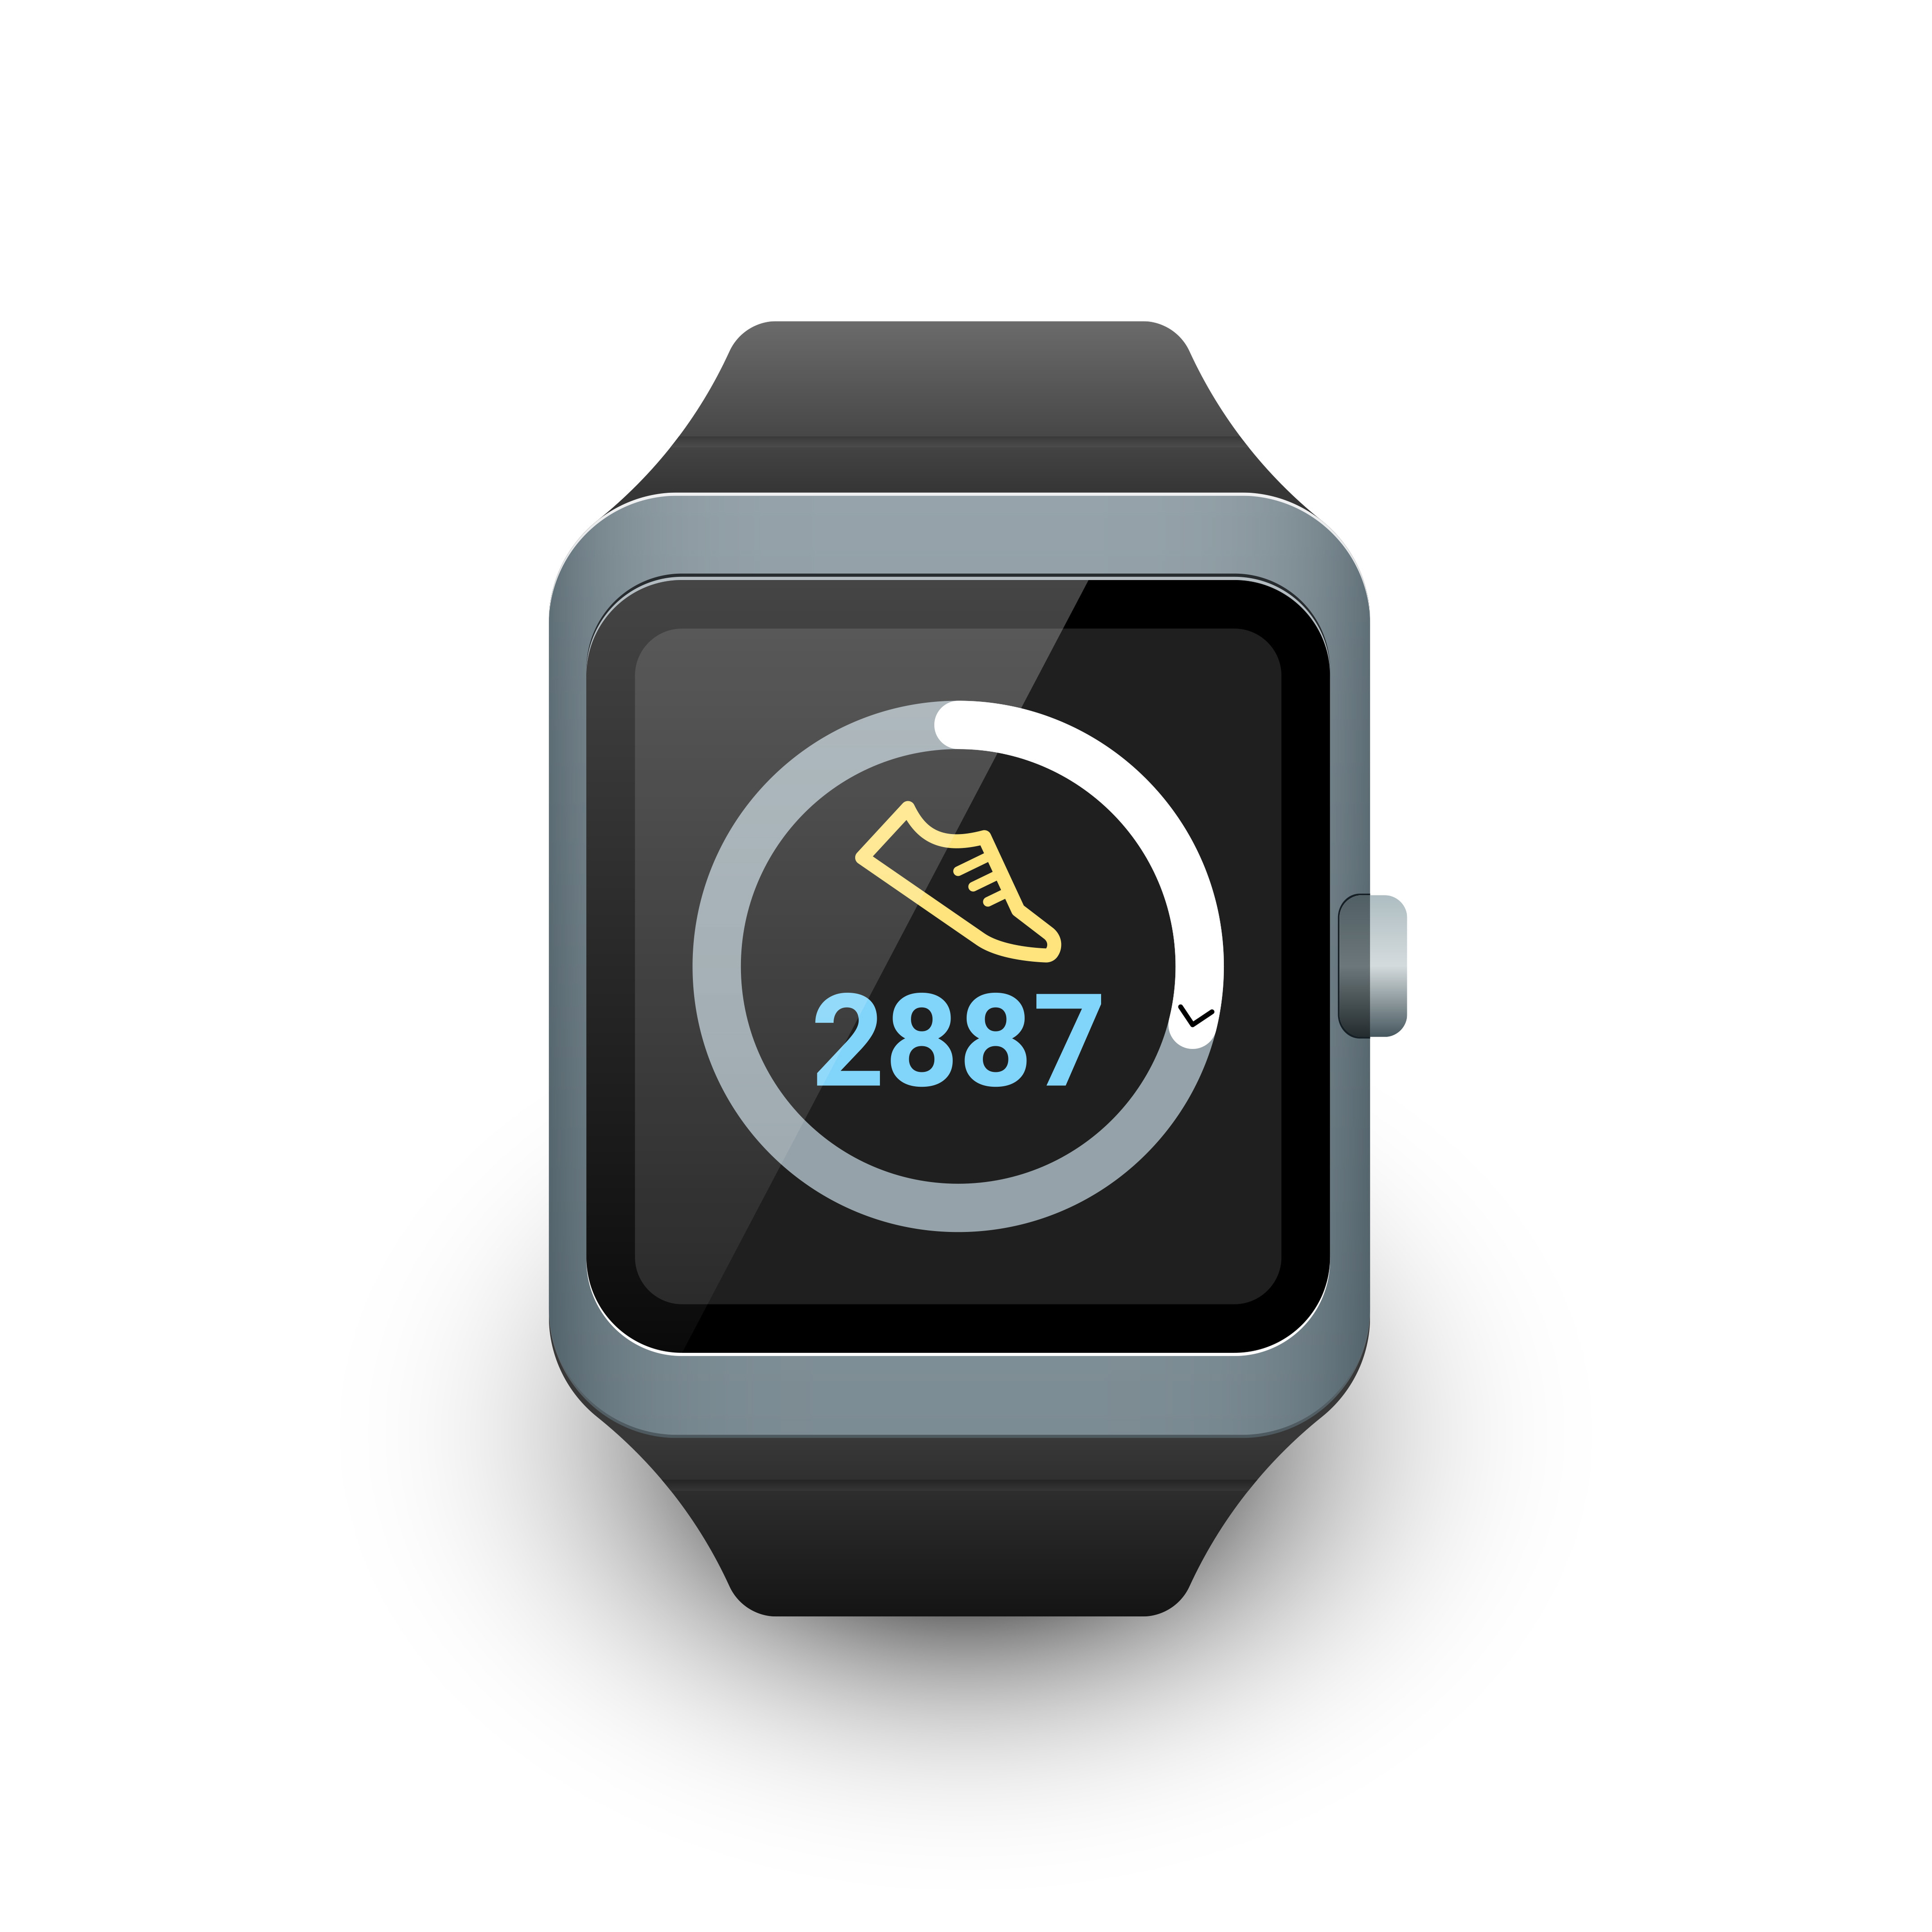 Smartwatch showing a step tracker app with a count of 2887 steps